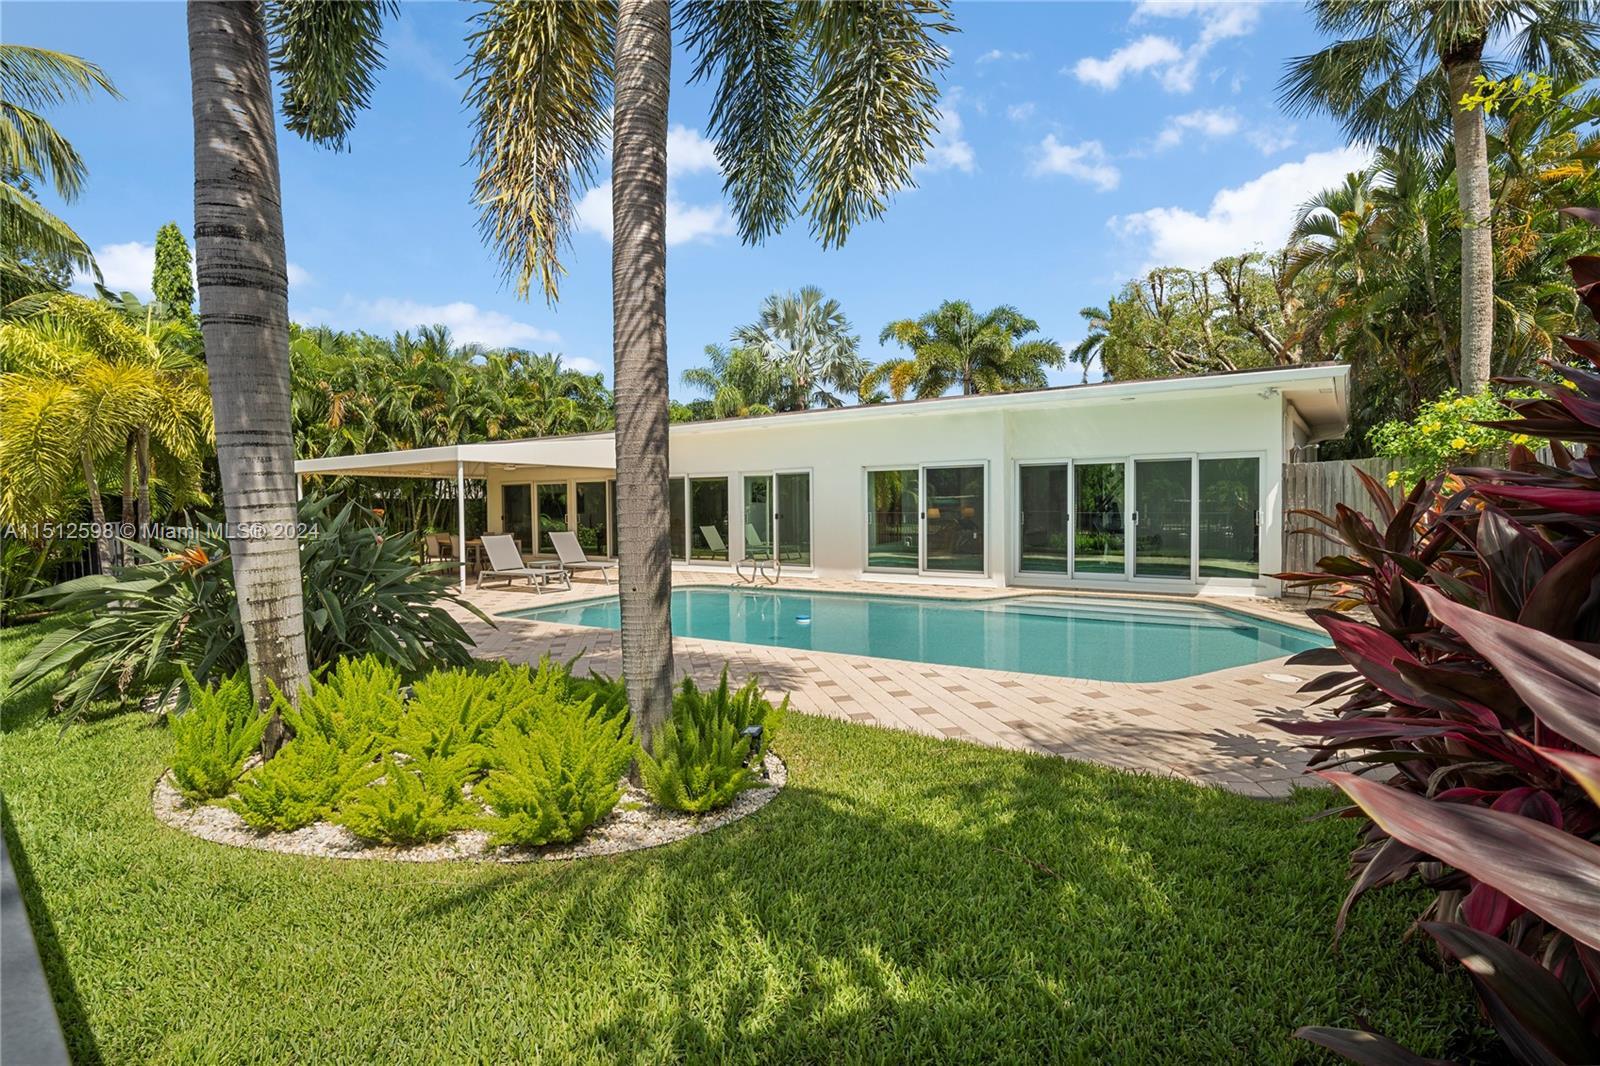 Midcentury Modern meets classic Florida in this beautiful 3/3 open-concept waterfront oasis. Fully r